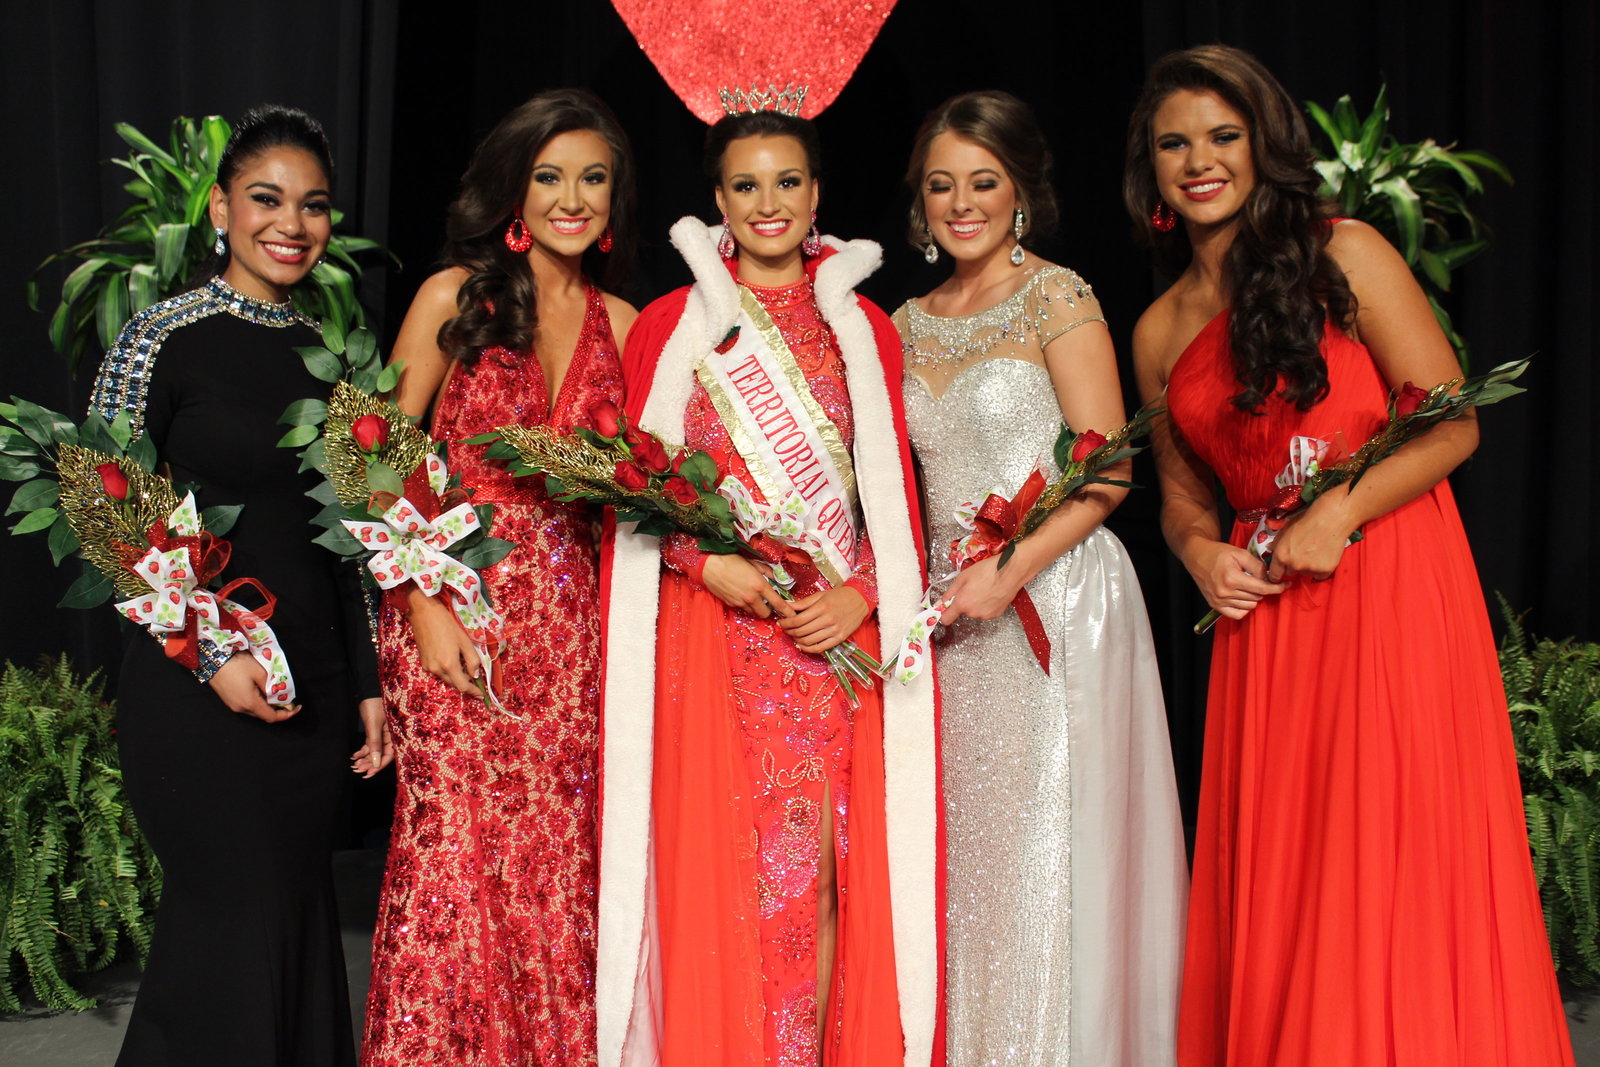 West Tennessee Strawberry Festival - Humboldt TN - Pageant - Main Terr1